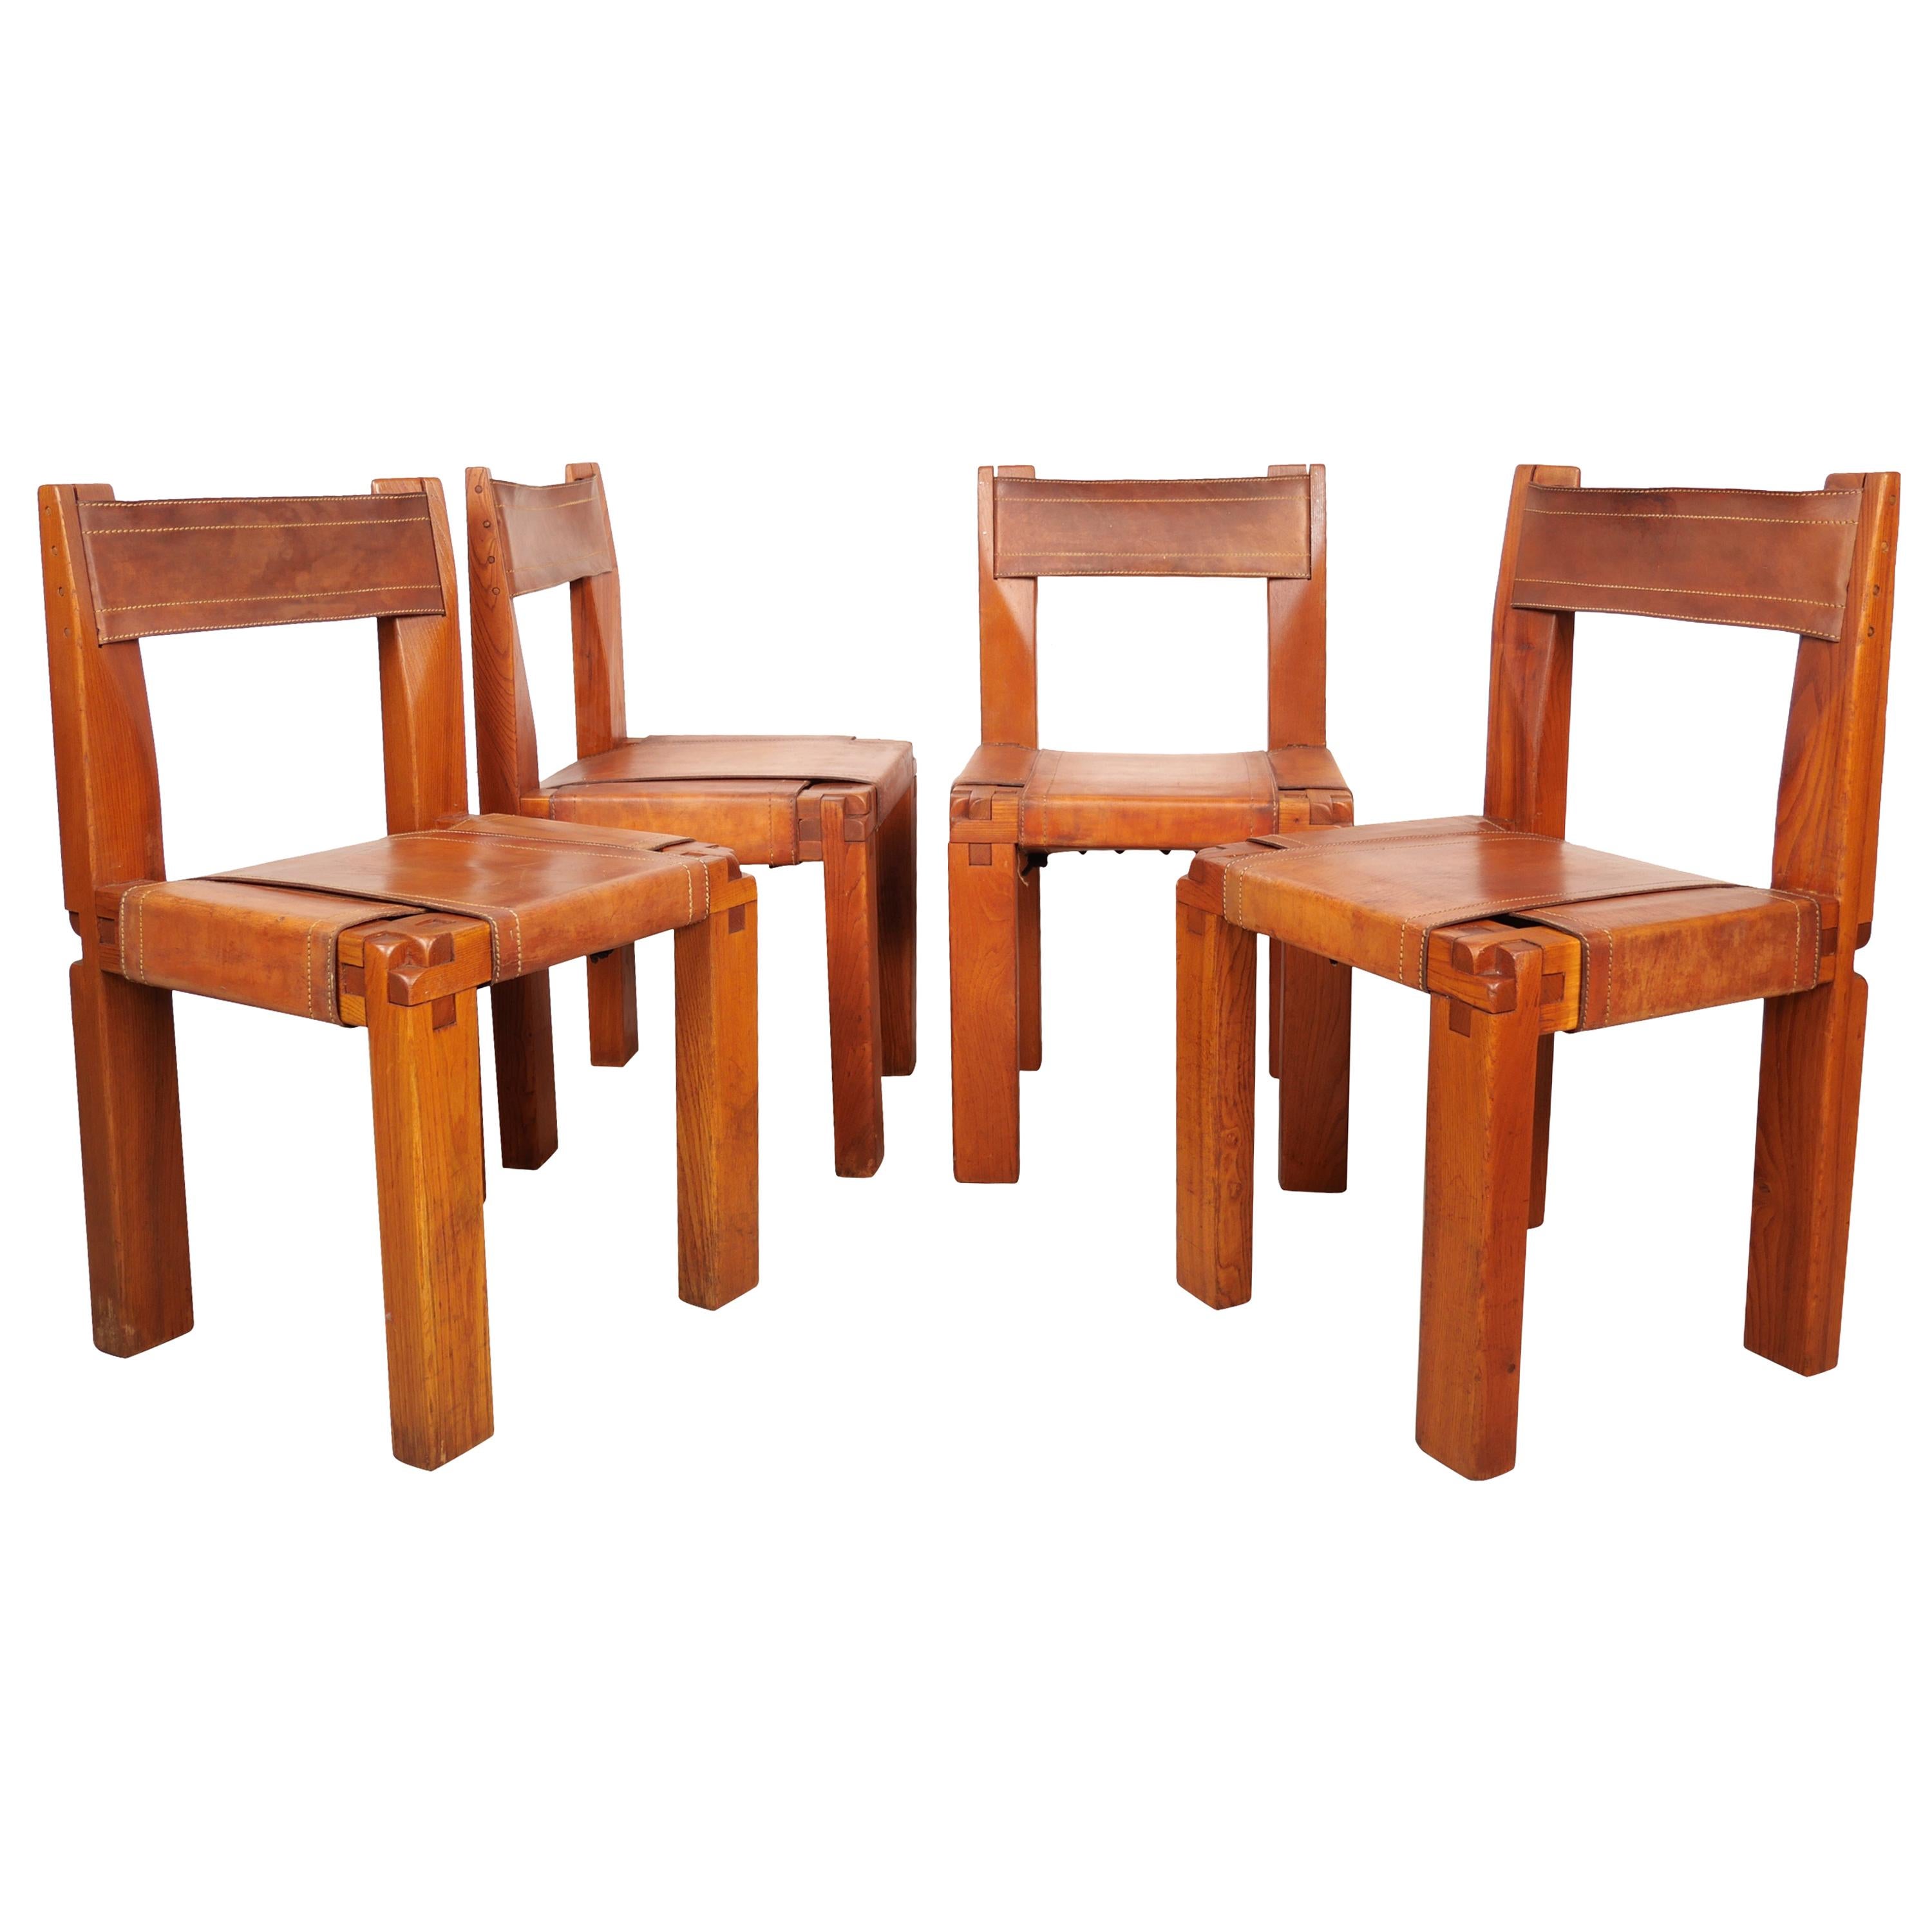 Pierre Chapo, Set of 4 Dining Chairs, Model S11, Elm and Leather, France 1970